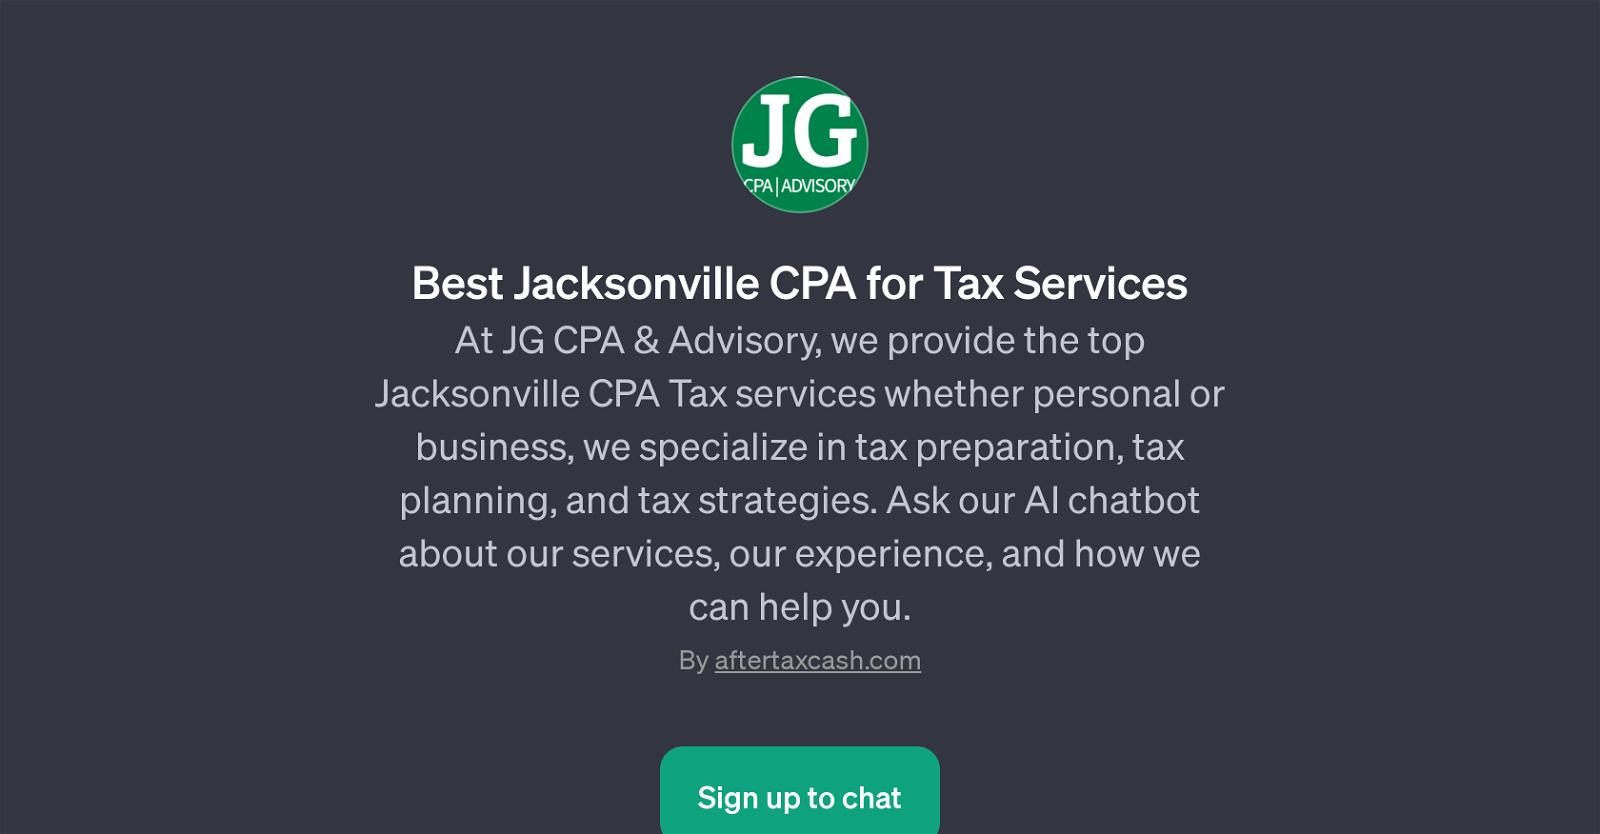 Best Jacksonville CPA for Tax Services website